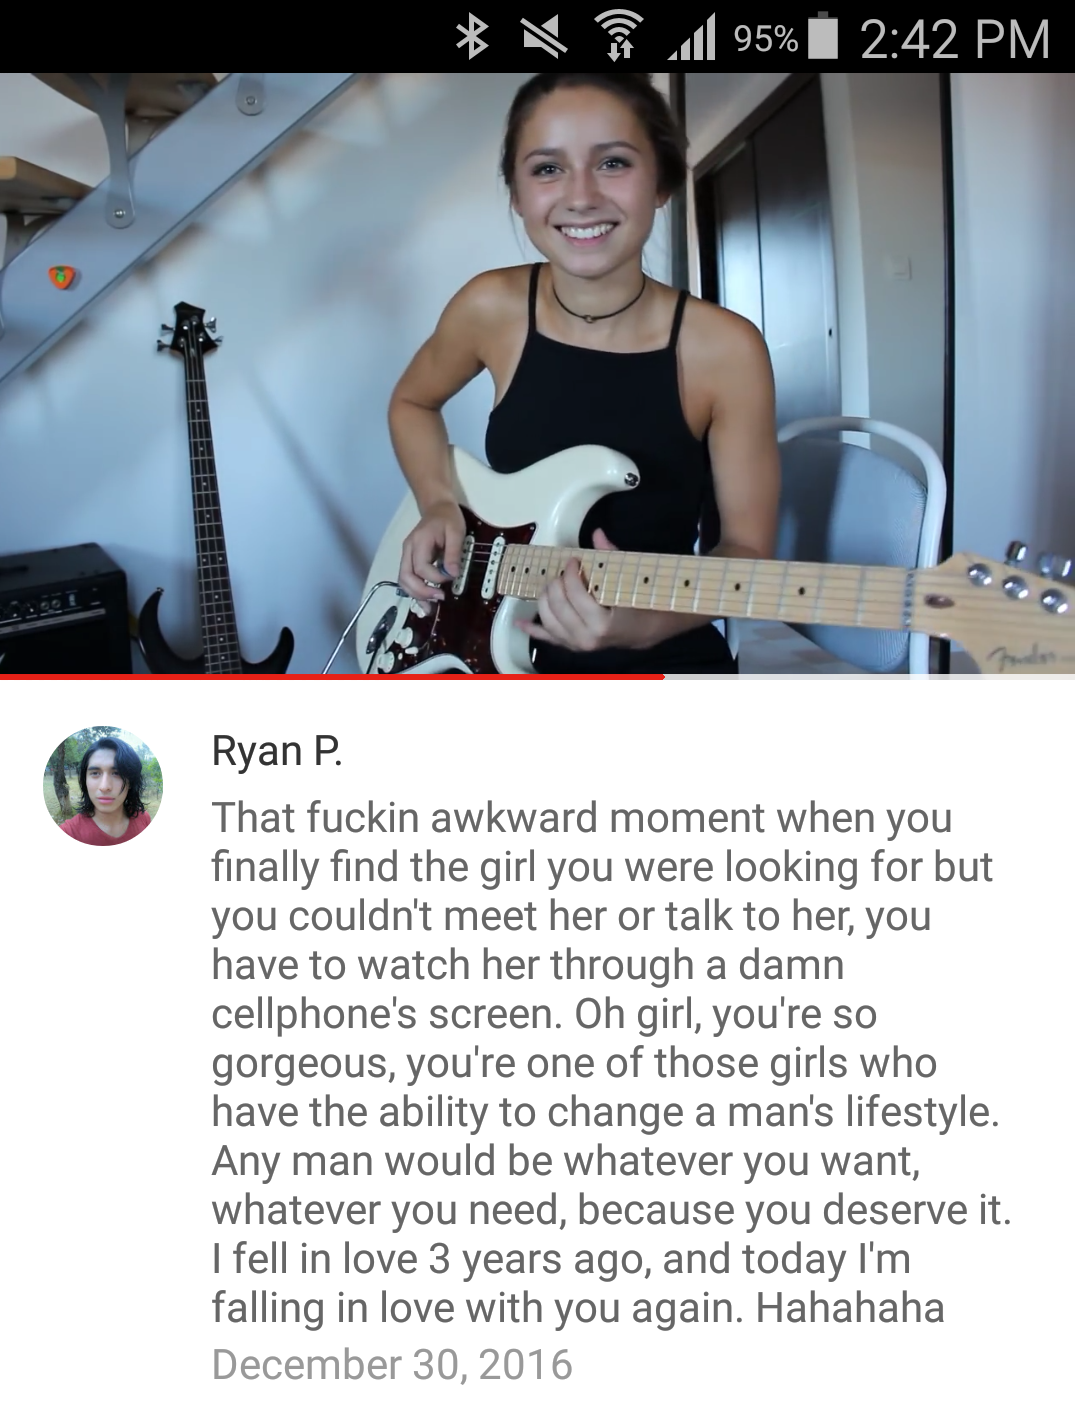 social media cringey kids - 95% Ryan P. That fuckin awkward moment when you finally find the girl you were looking for but you couldn't meet her or talk to her, you have to watch her through a damn cellphone's screen. Oh girl, you're so gorgeous, you're o